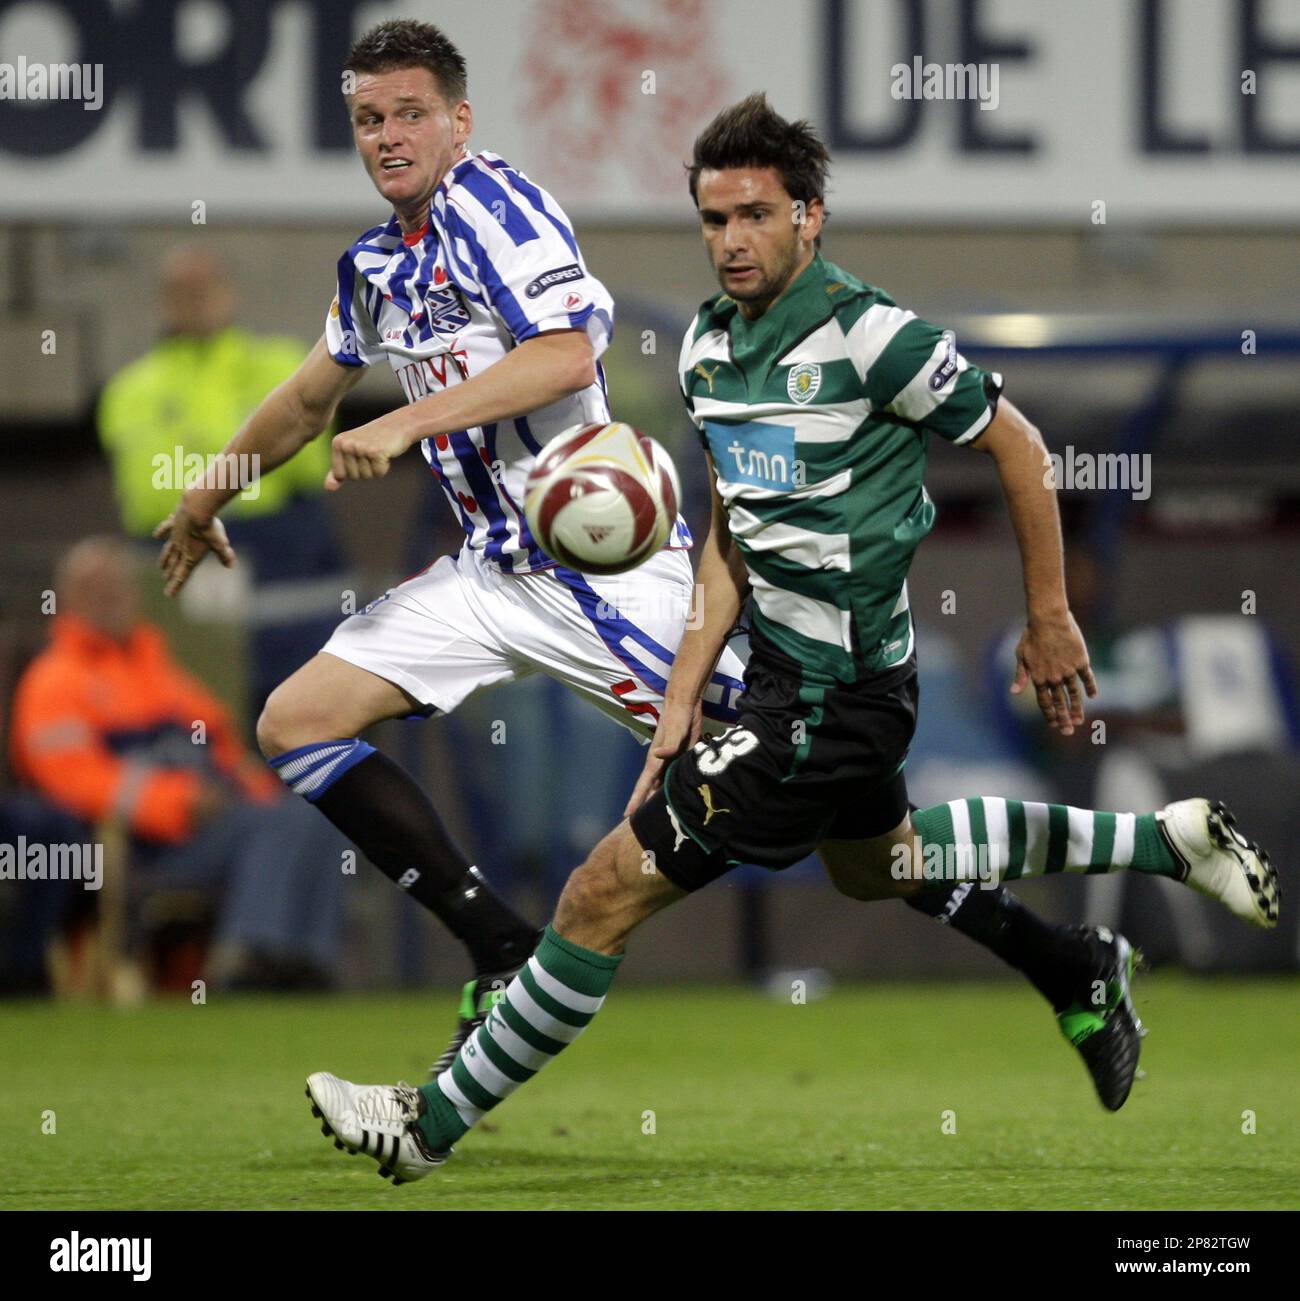 Michael Dingsdag of SC Heerenveen, left and Helder Postiga of Sporting  battle for the ball, during their Europa League first round Group D soccer  match at the Abe Lenstra stadium in Heerenveen,